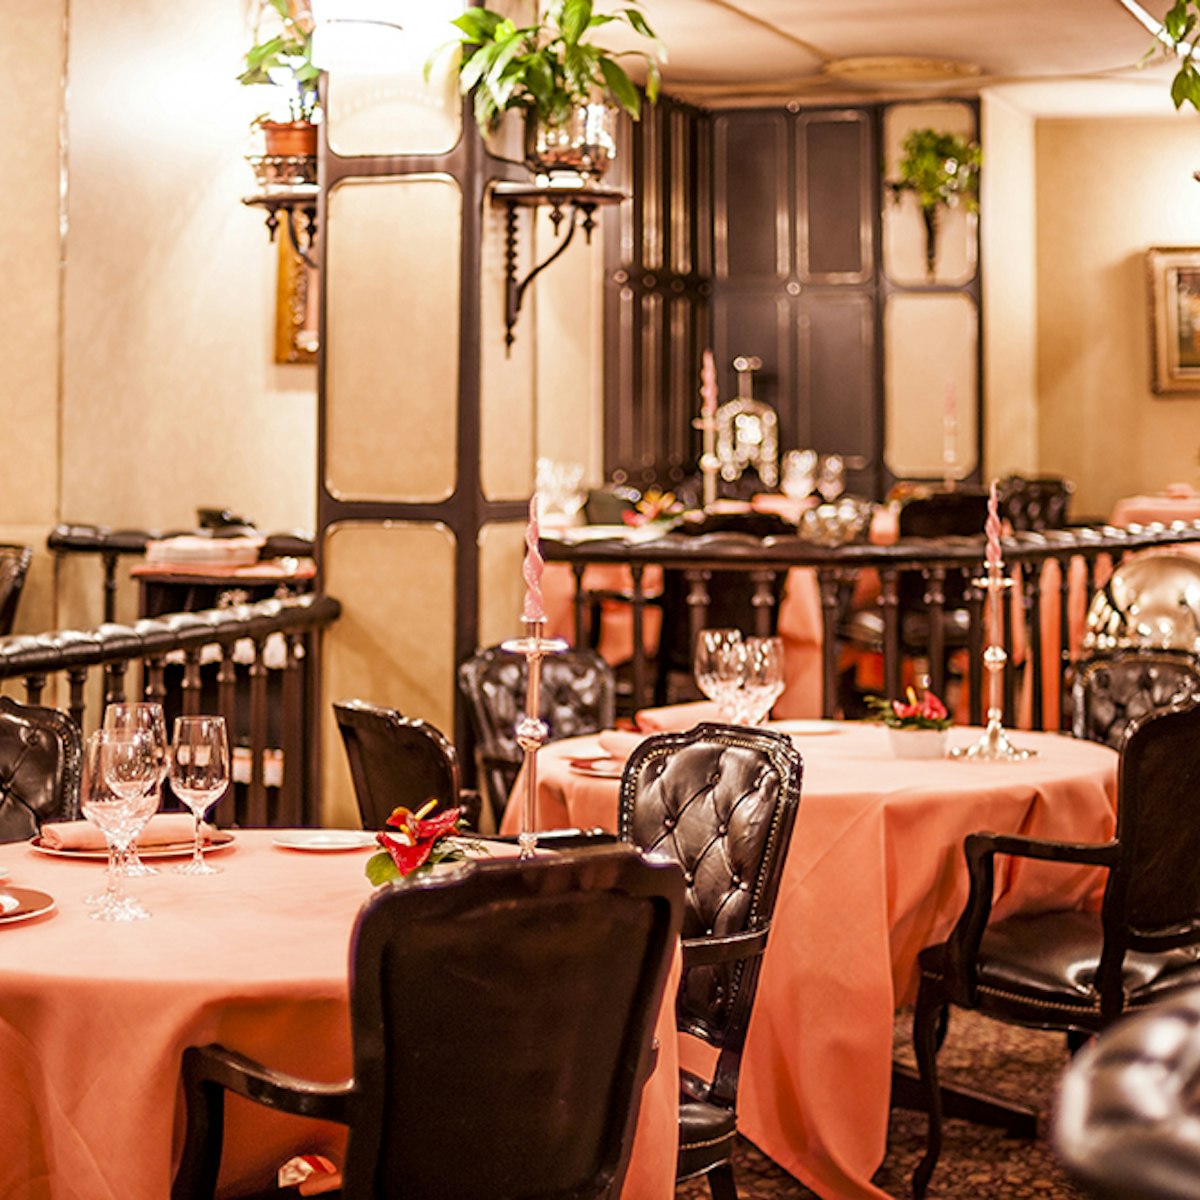 Via Veneto is an elegant dining room once frequented by the artist Salvador Dalí, serving refined Catalan cuisine.